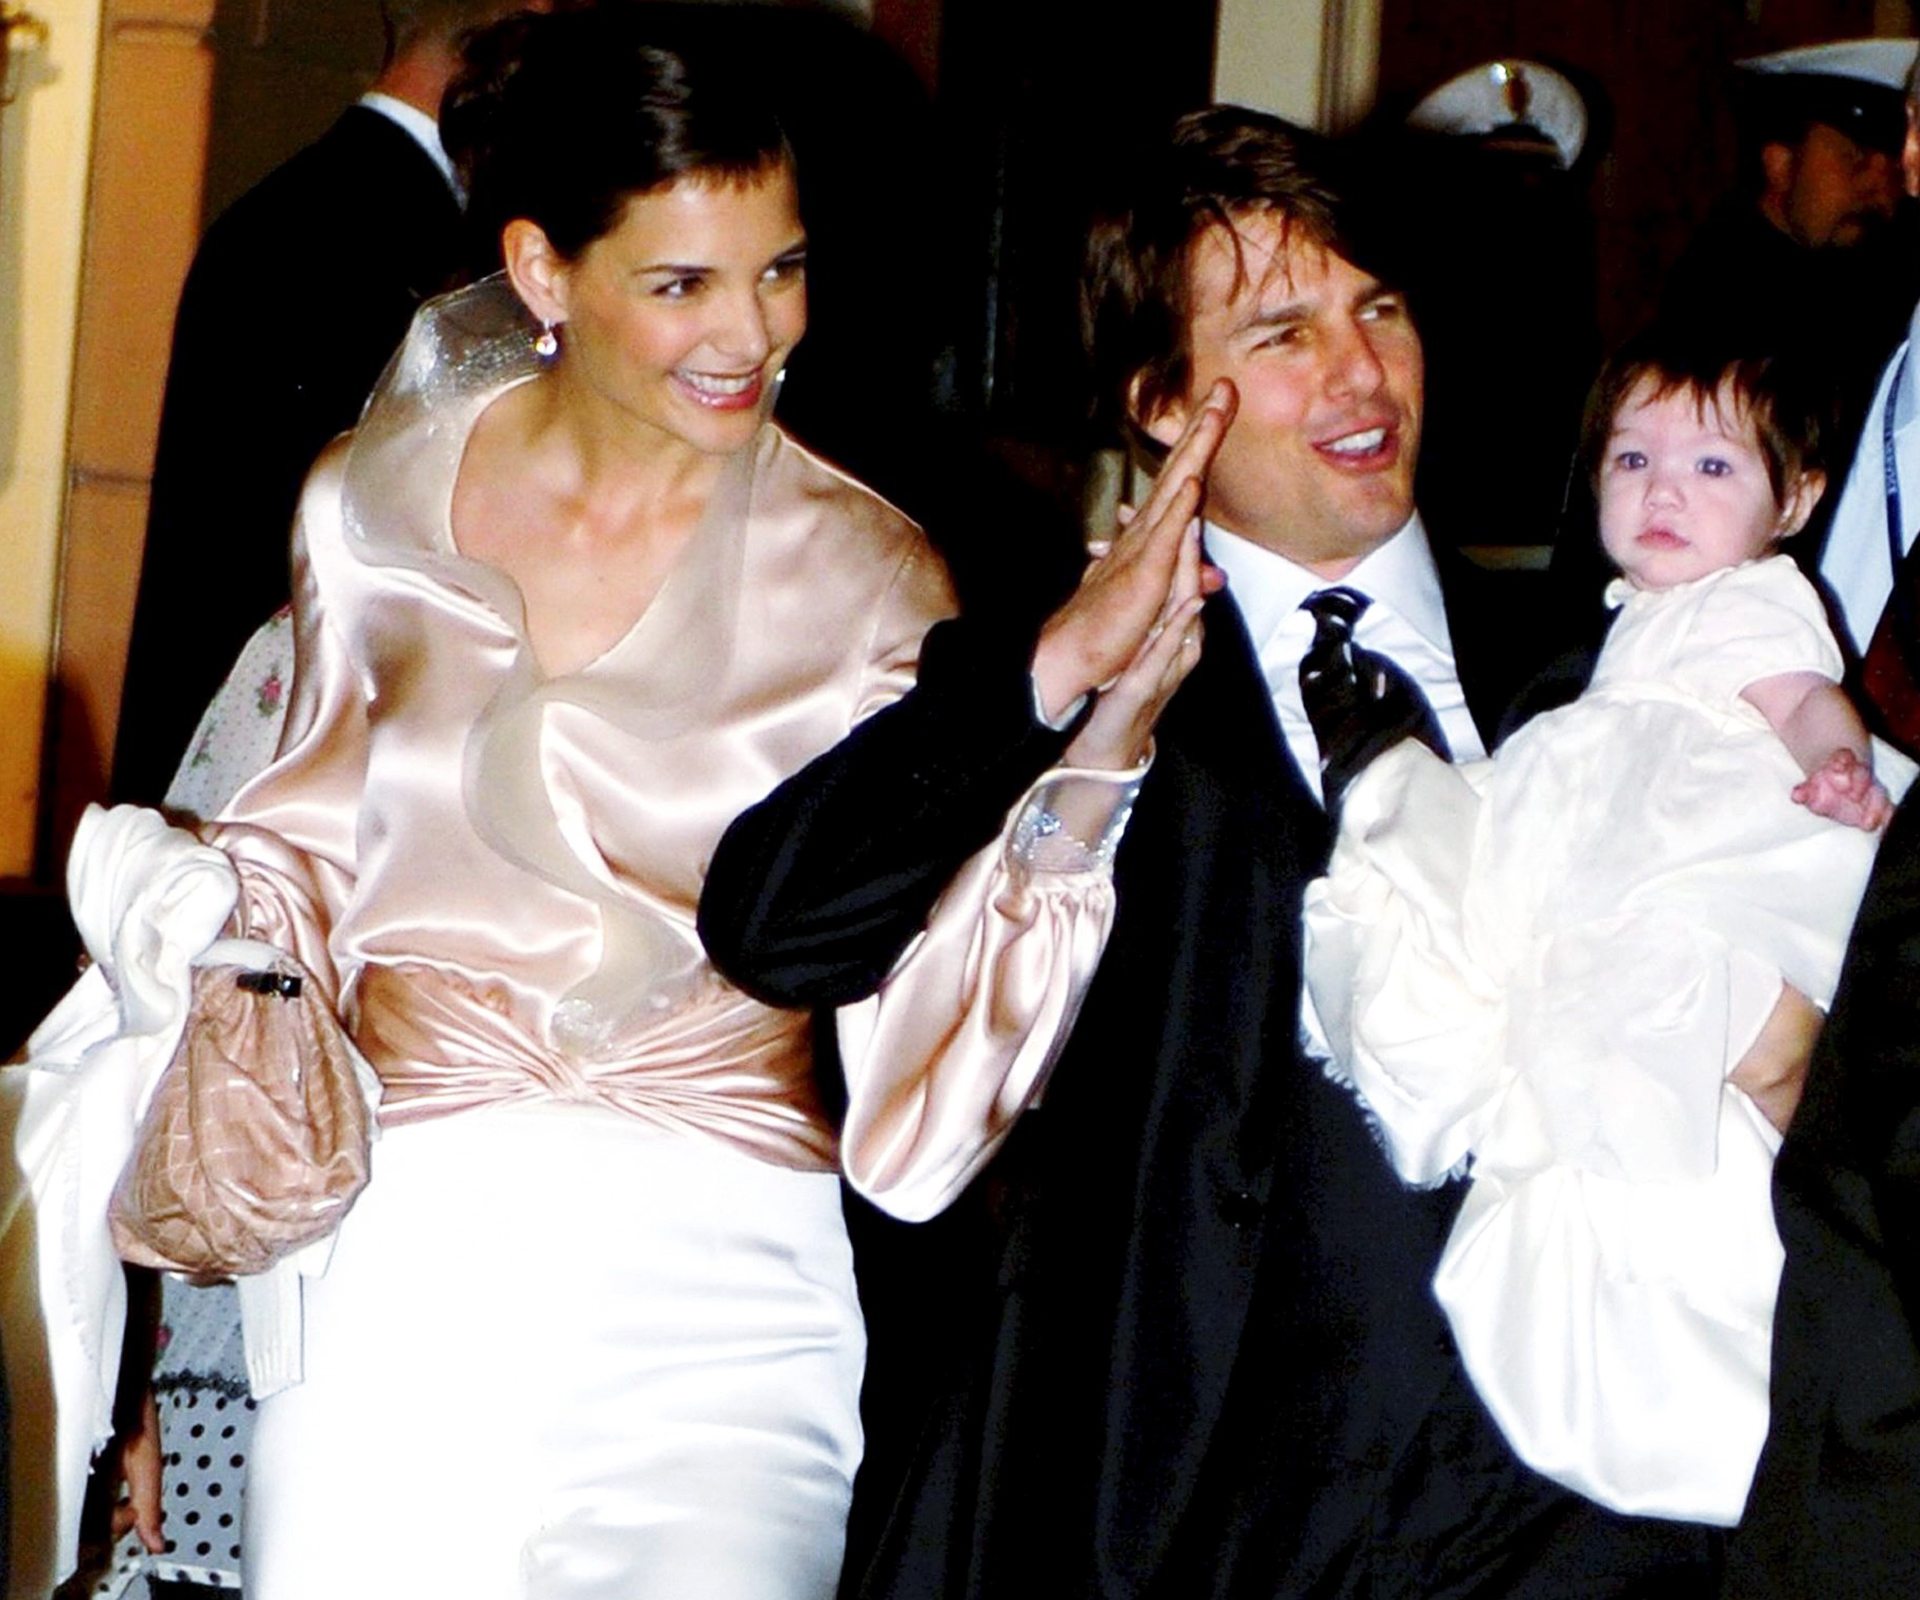 Tom Cruise ‘left Suri to cry for hours’ at Scientology wedding